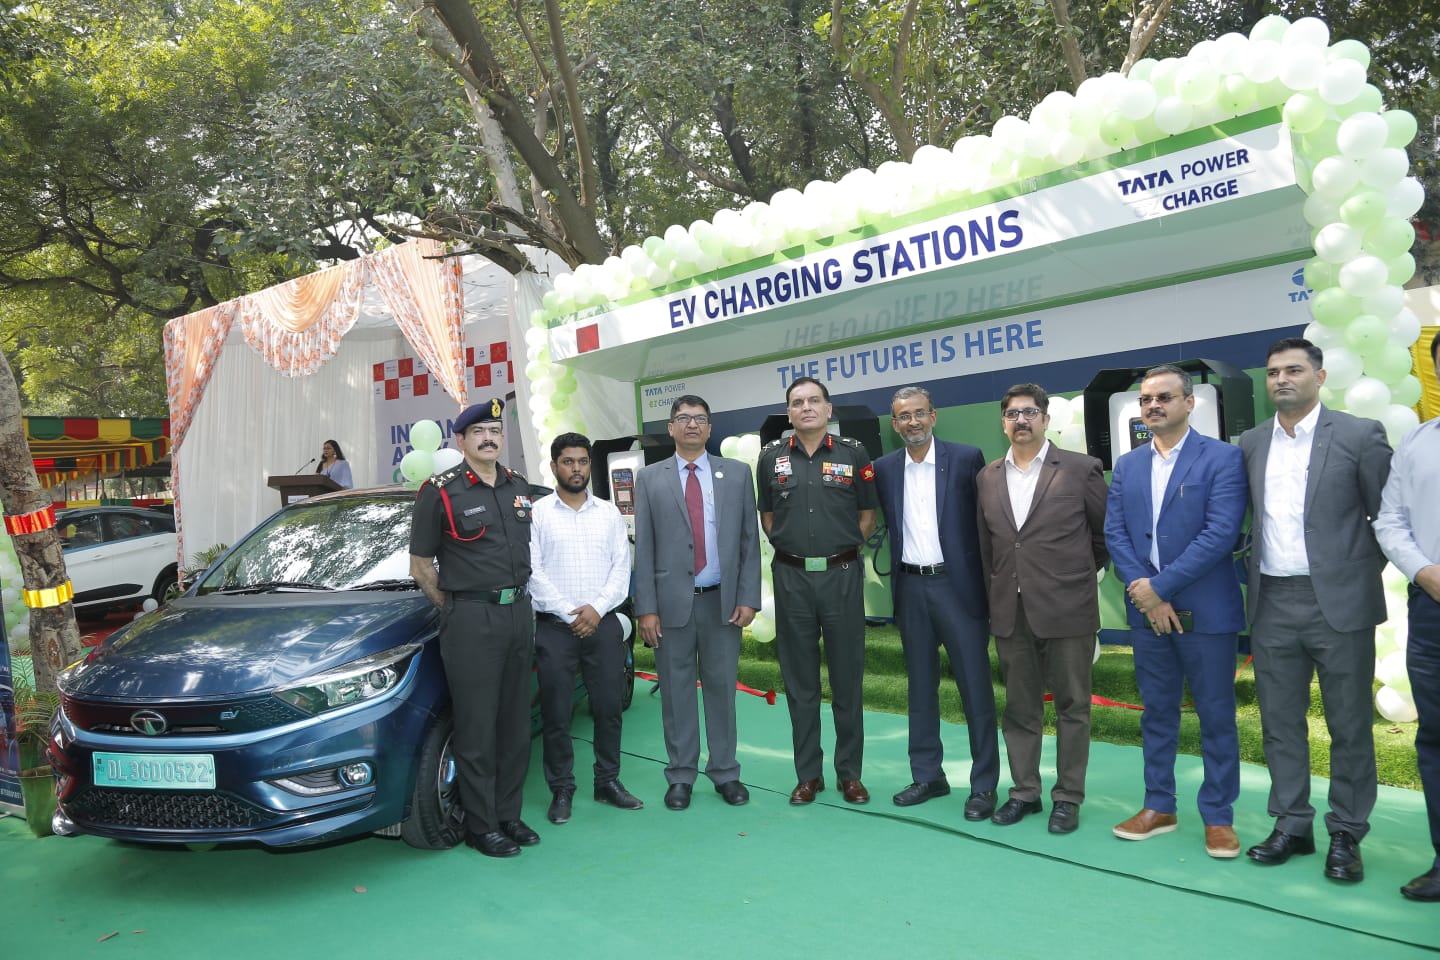 INDIAN ARMY COLLABORATES WITH TATA POWER TO SETUP ELECTRIC VEHICLE CHARGING POINTS